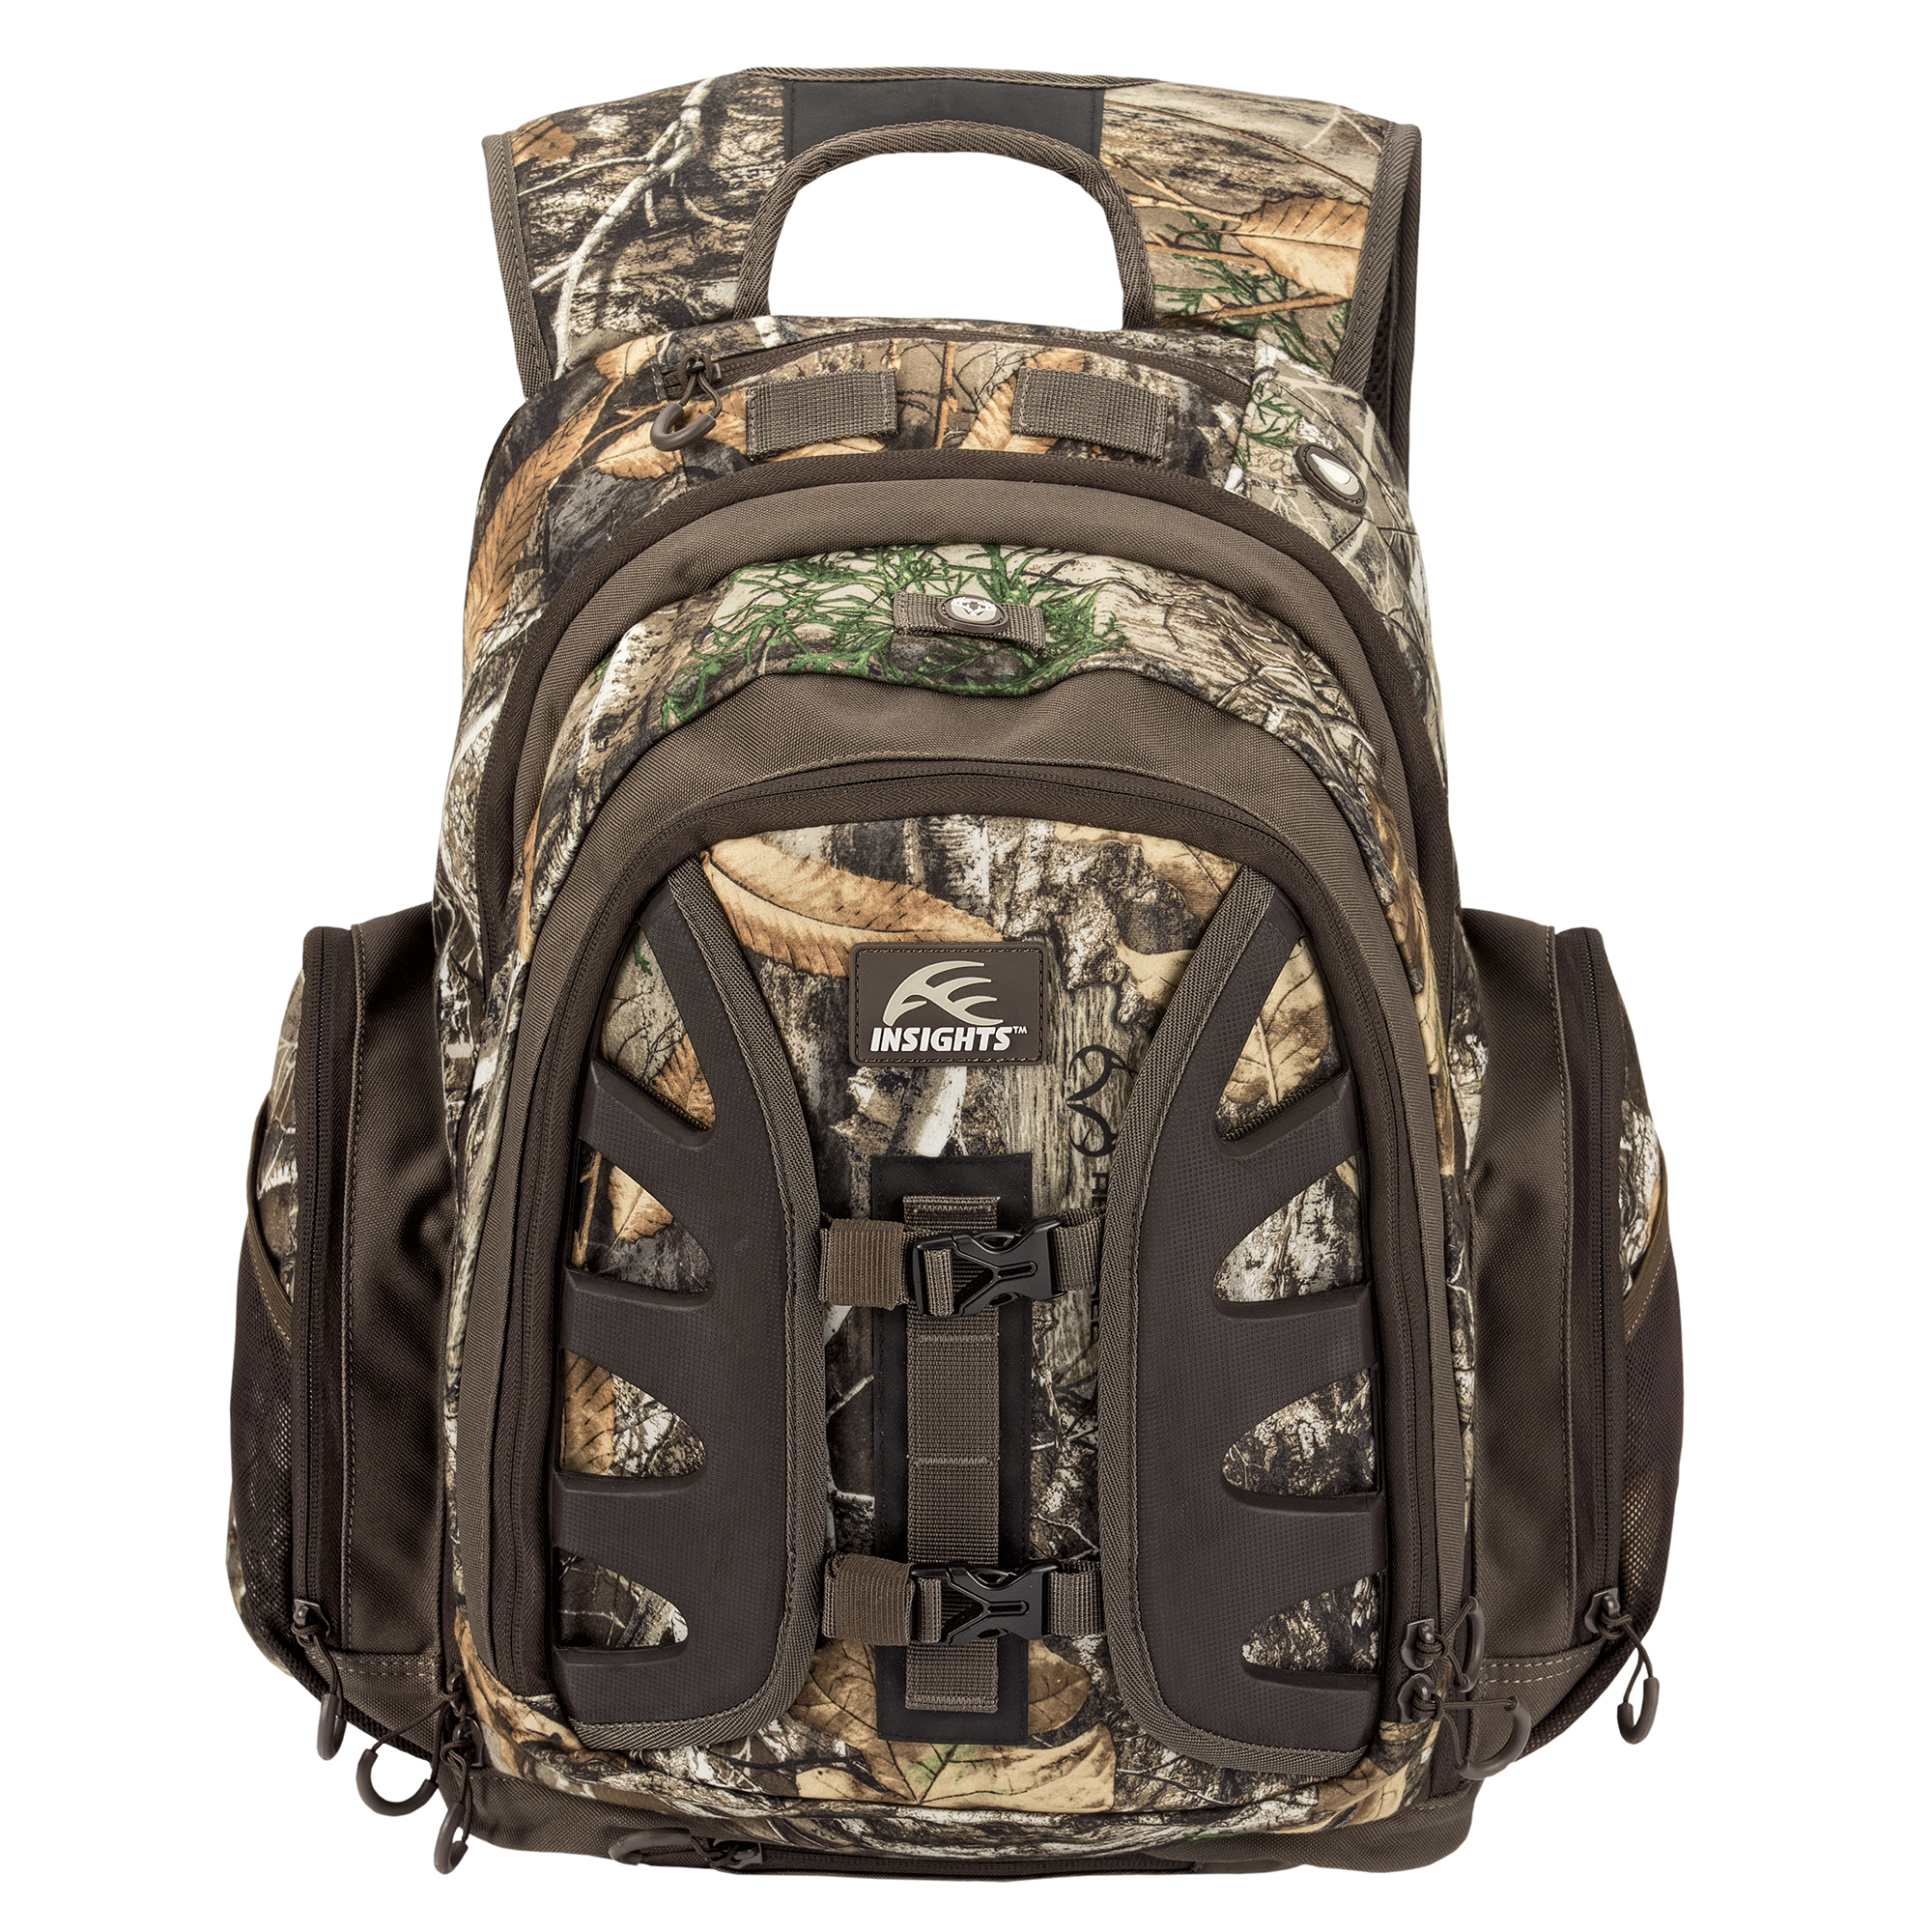 Insights 9301 The Element Outdoor Hiking Hunting Backpack, Realtree Edge Camo - image 2 of 9